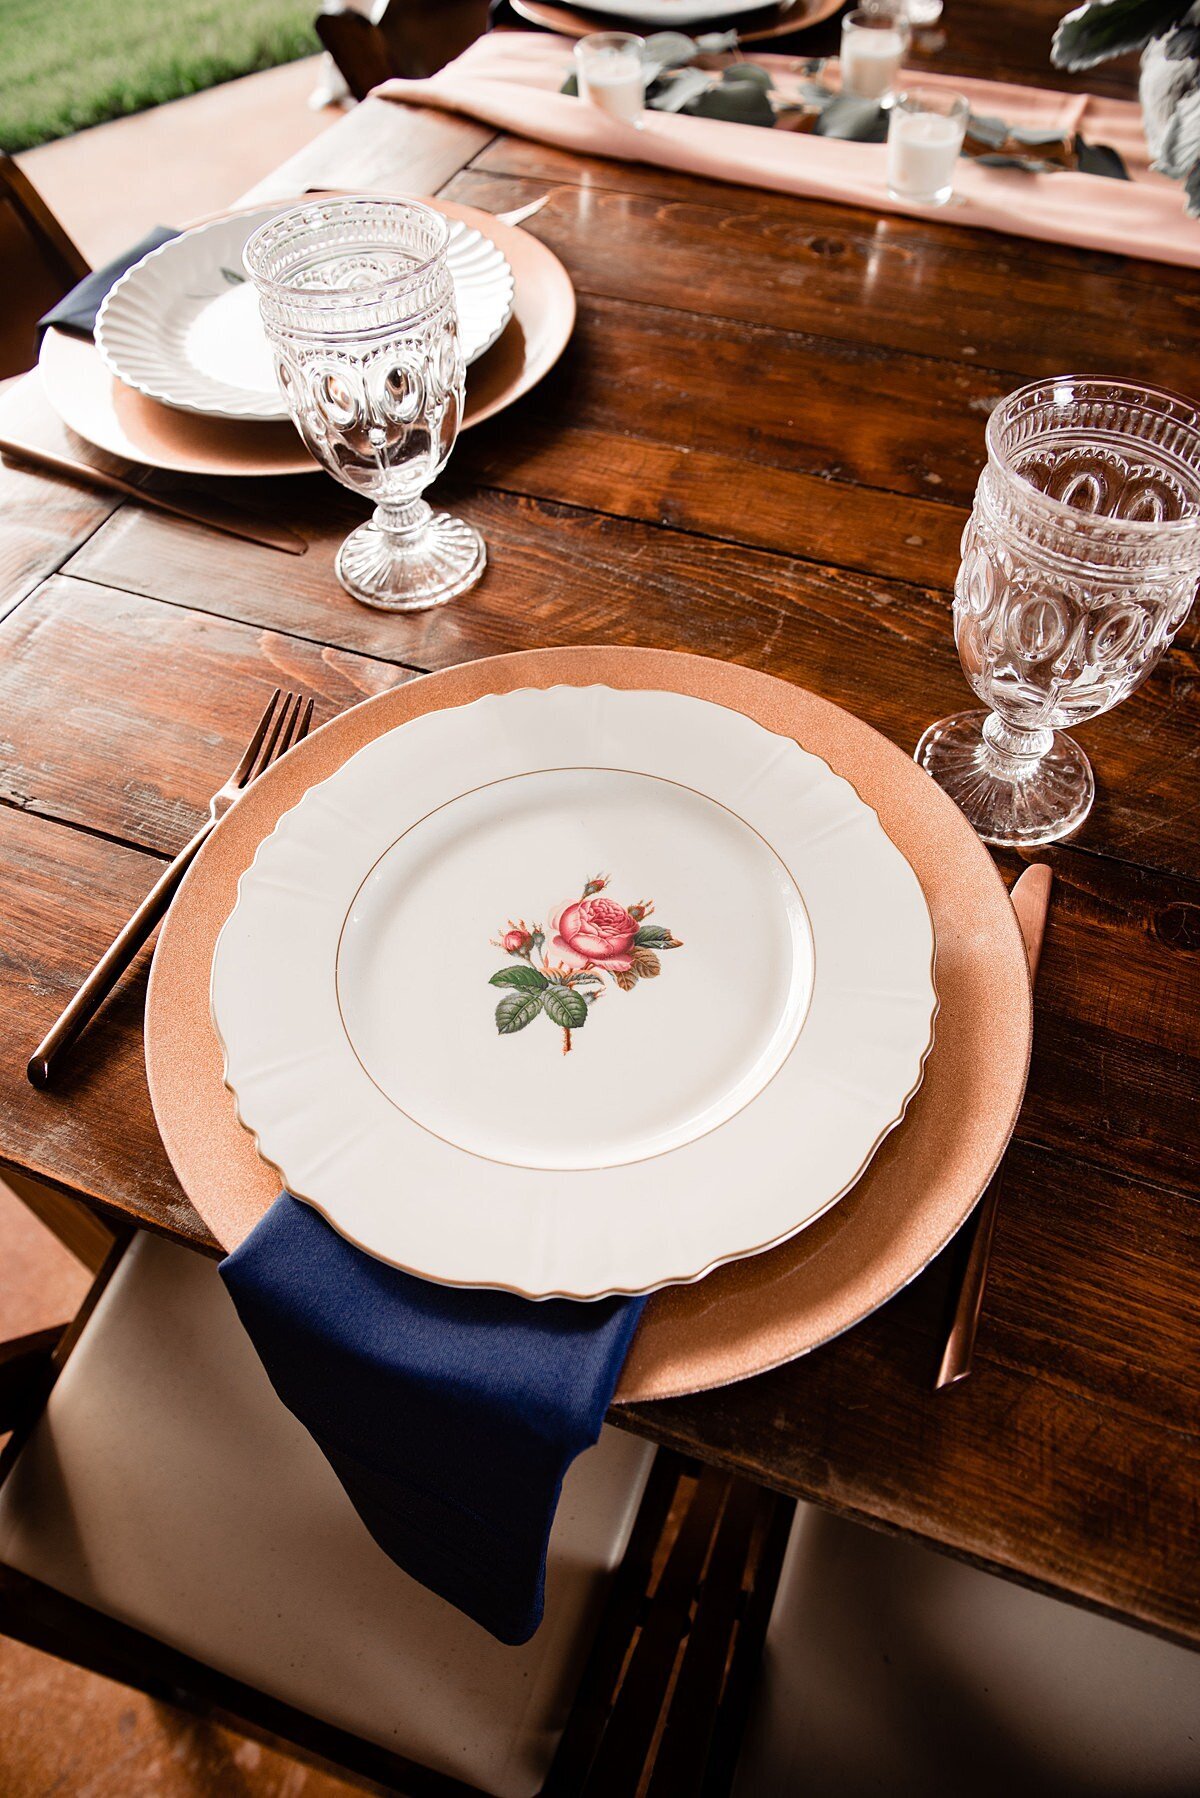 A brown barn wood farm table with a gold charger and vintage china plate is accented with a navy linen napkin and gold flatware with a clear glass water goblet.